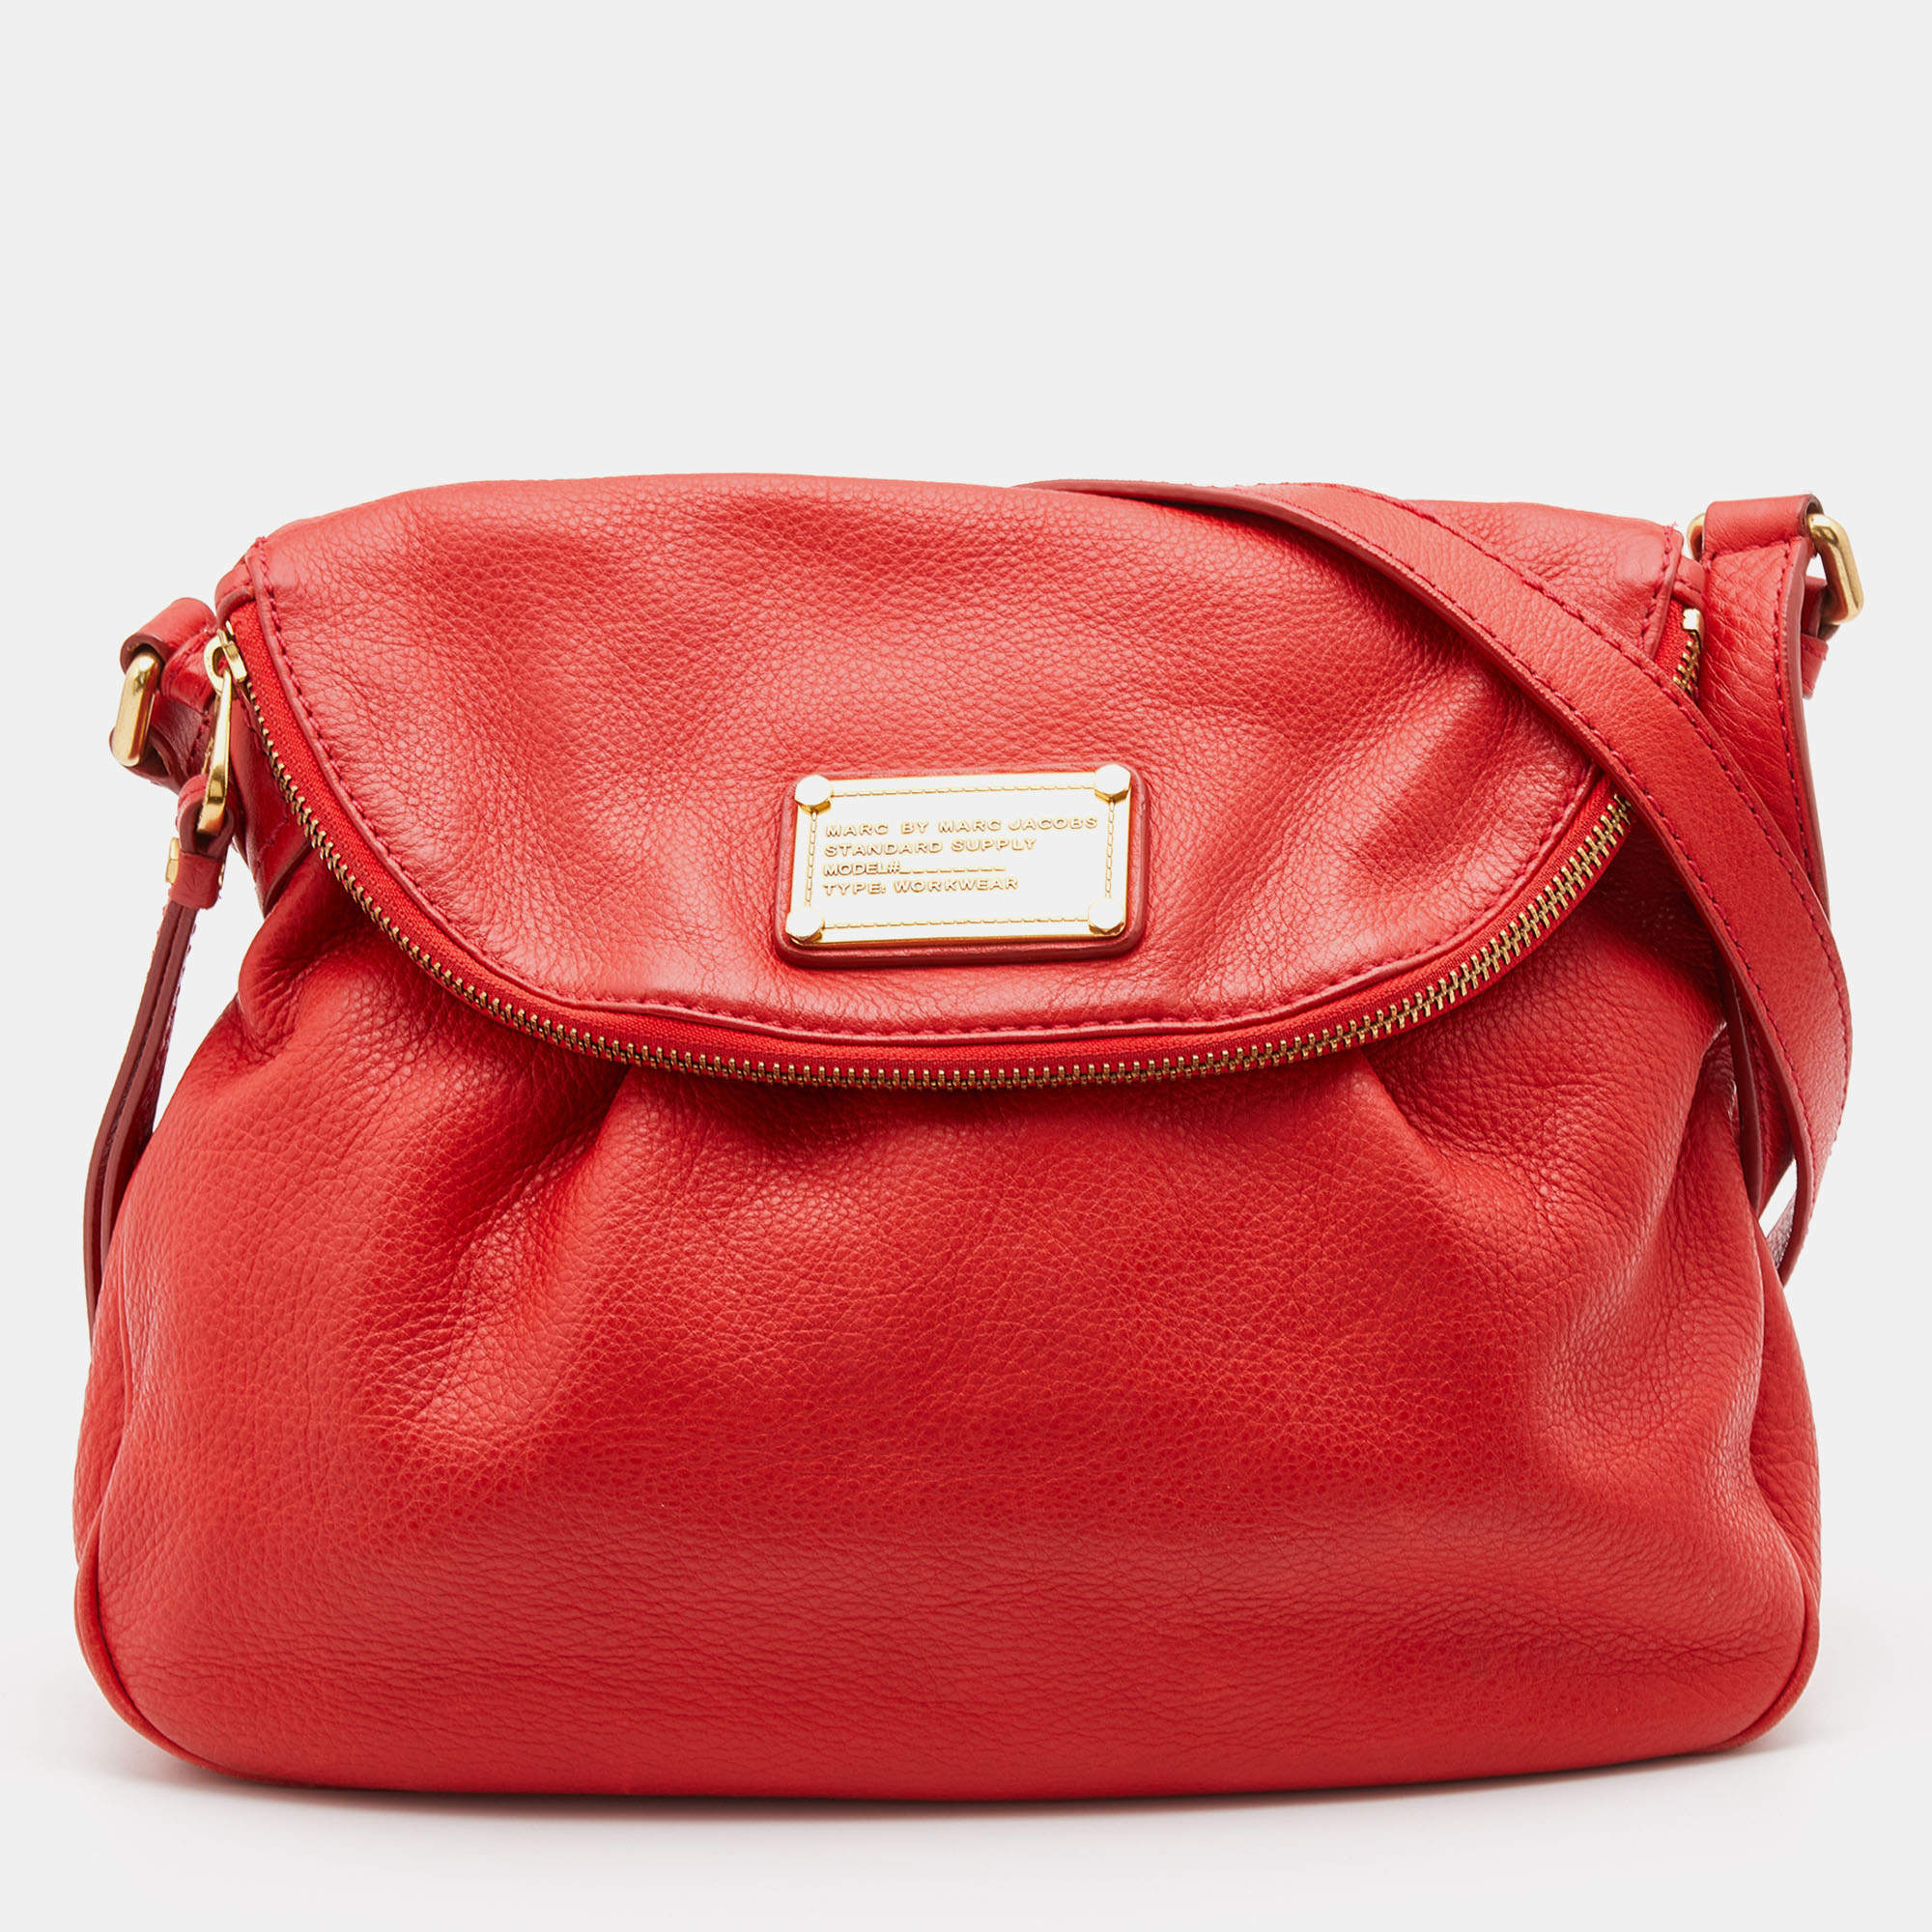 Classic q leather crossbody bag Marc by Marc Jacobs Orange in